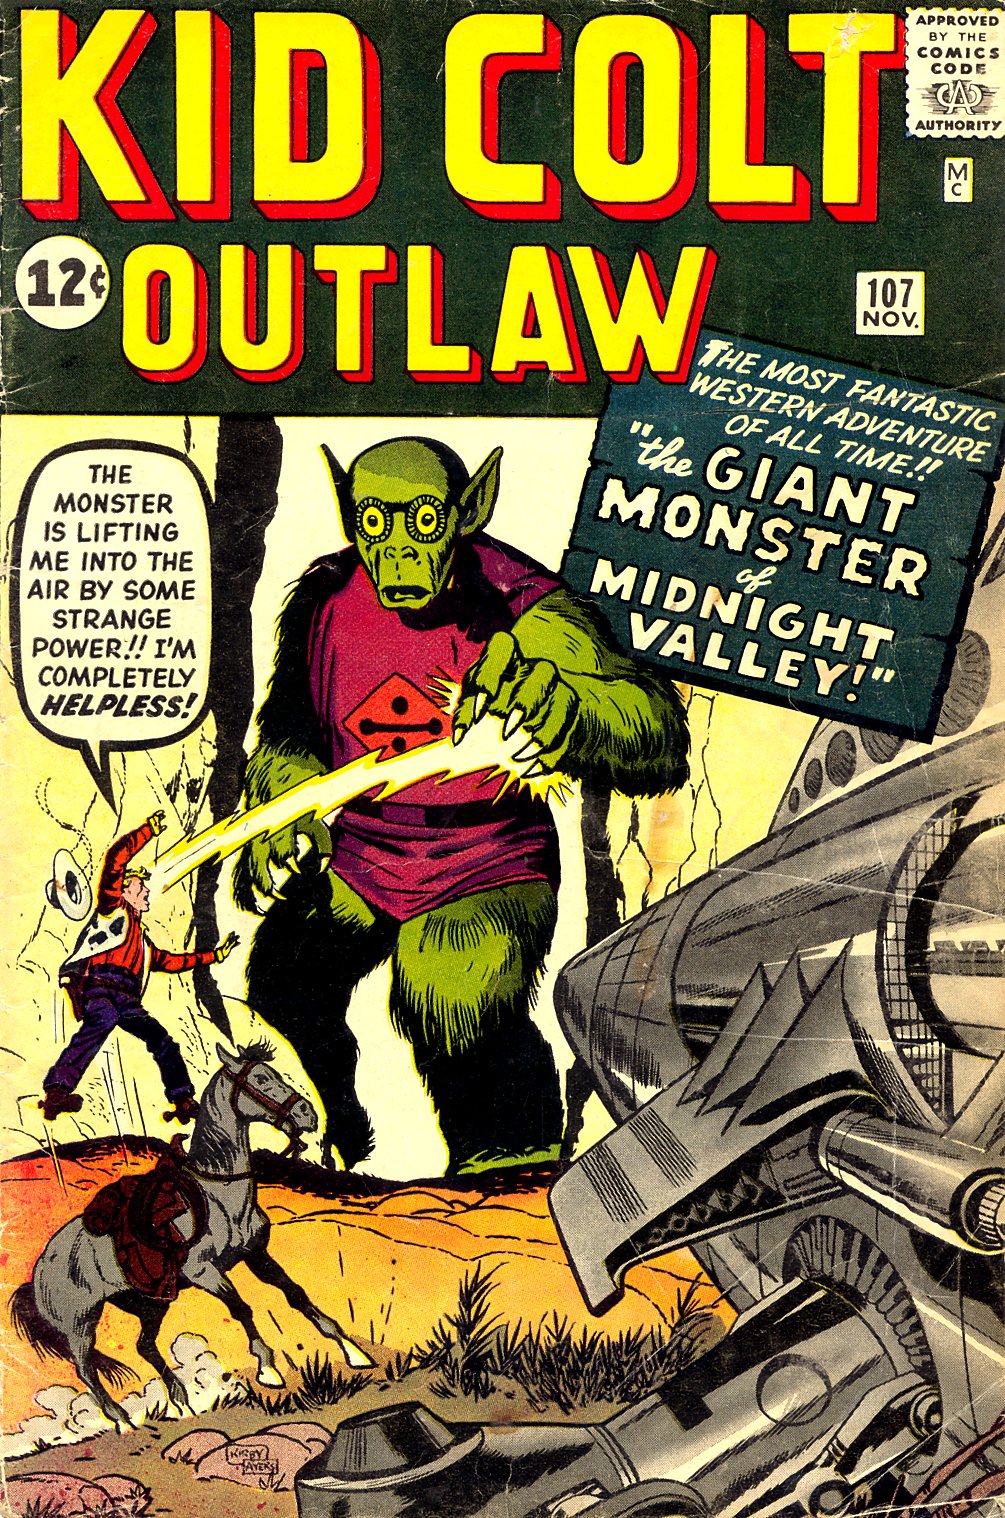 Read online Kid Colt Outlaw comic -  Issue #107 - 1